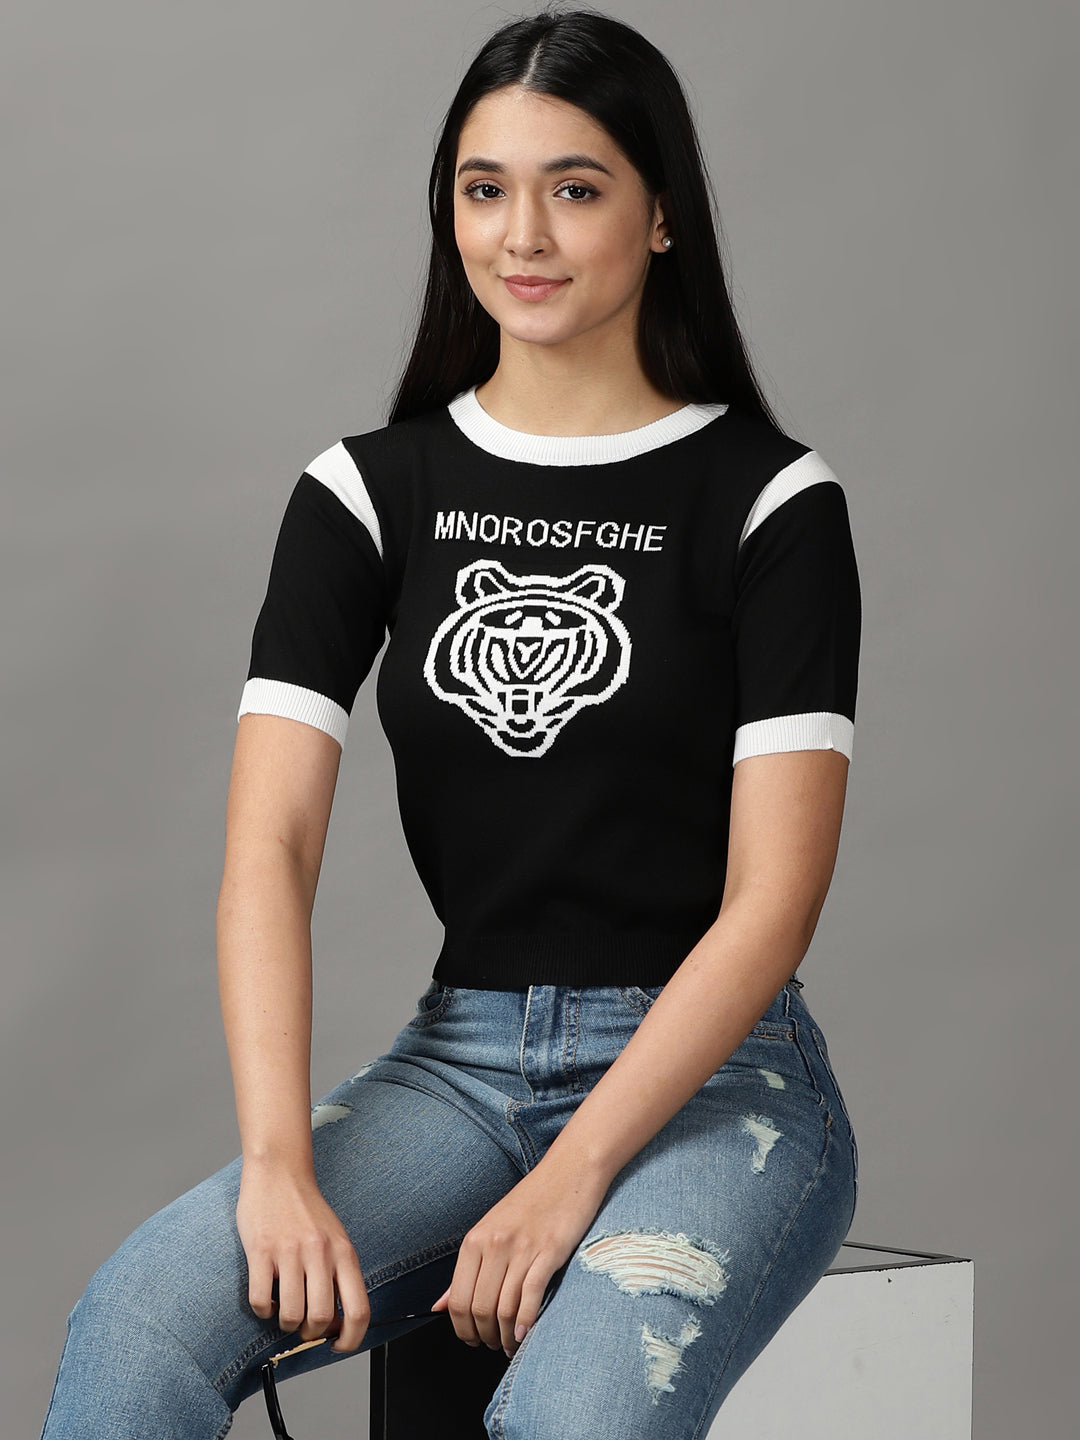 Women's Black Solid Fitted Crop Top